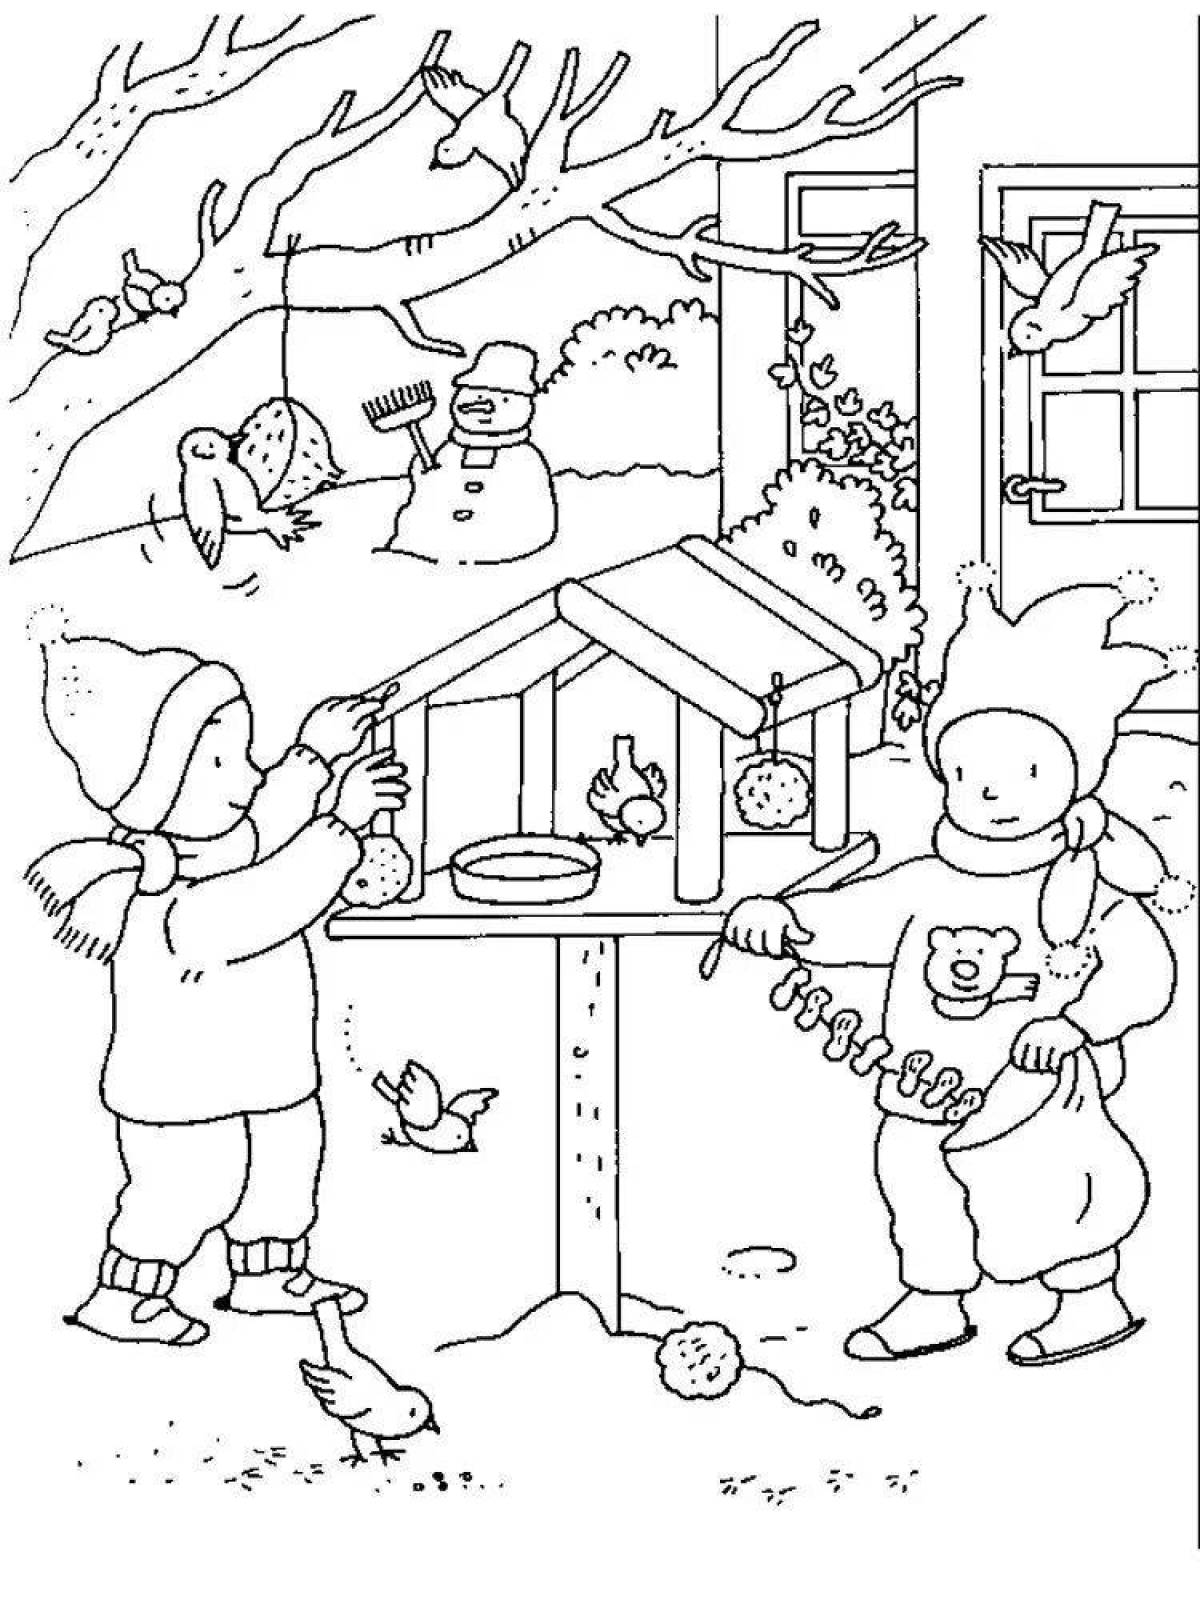 Colorful bird feeder coloring pages for children in winter